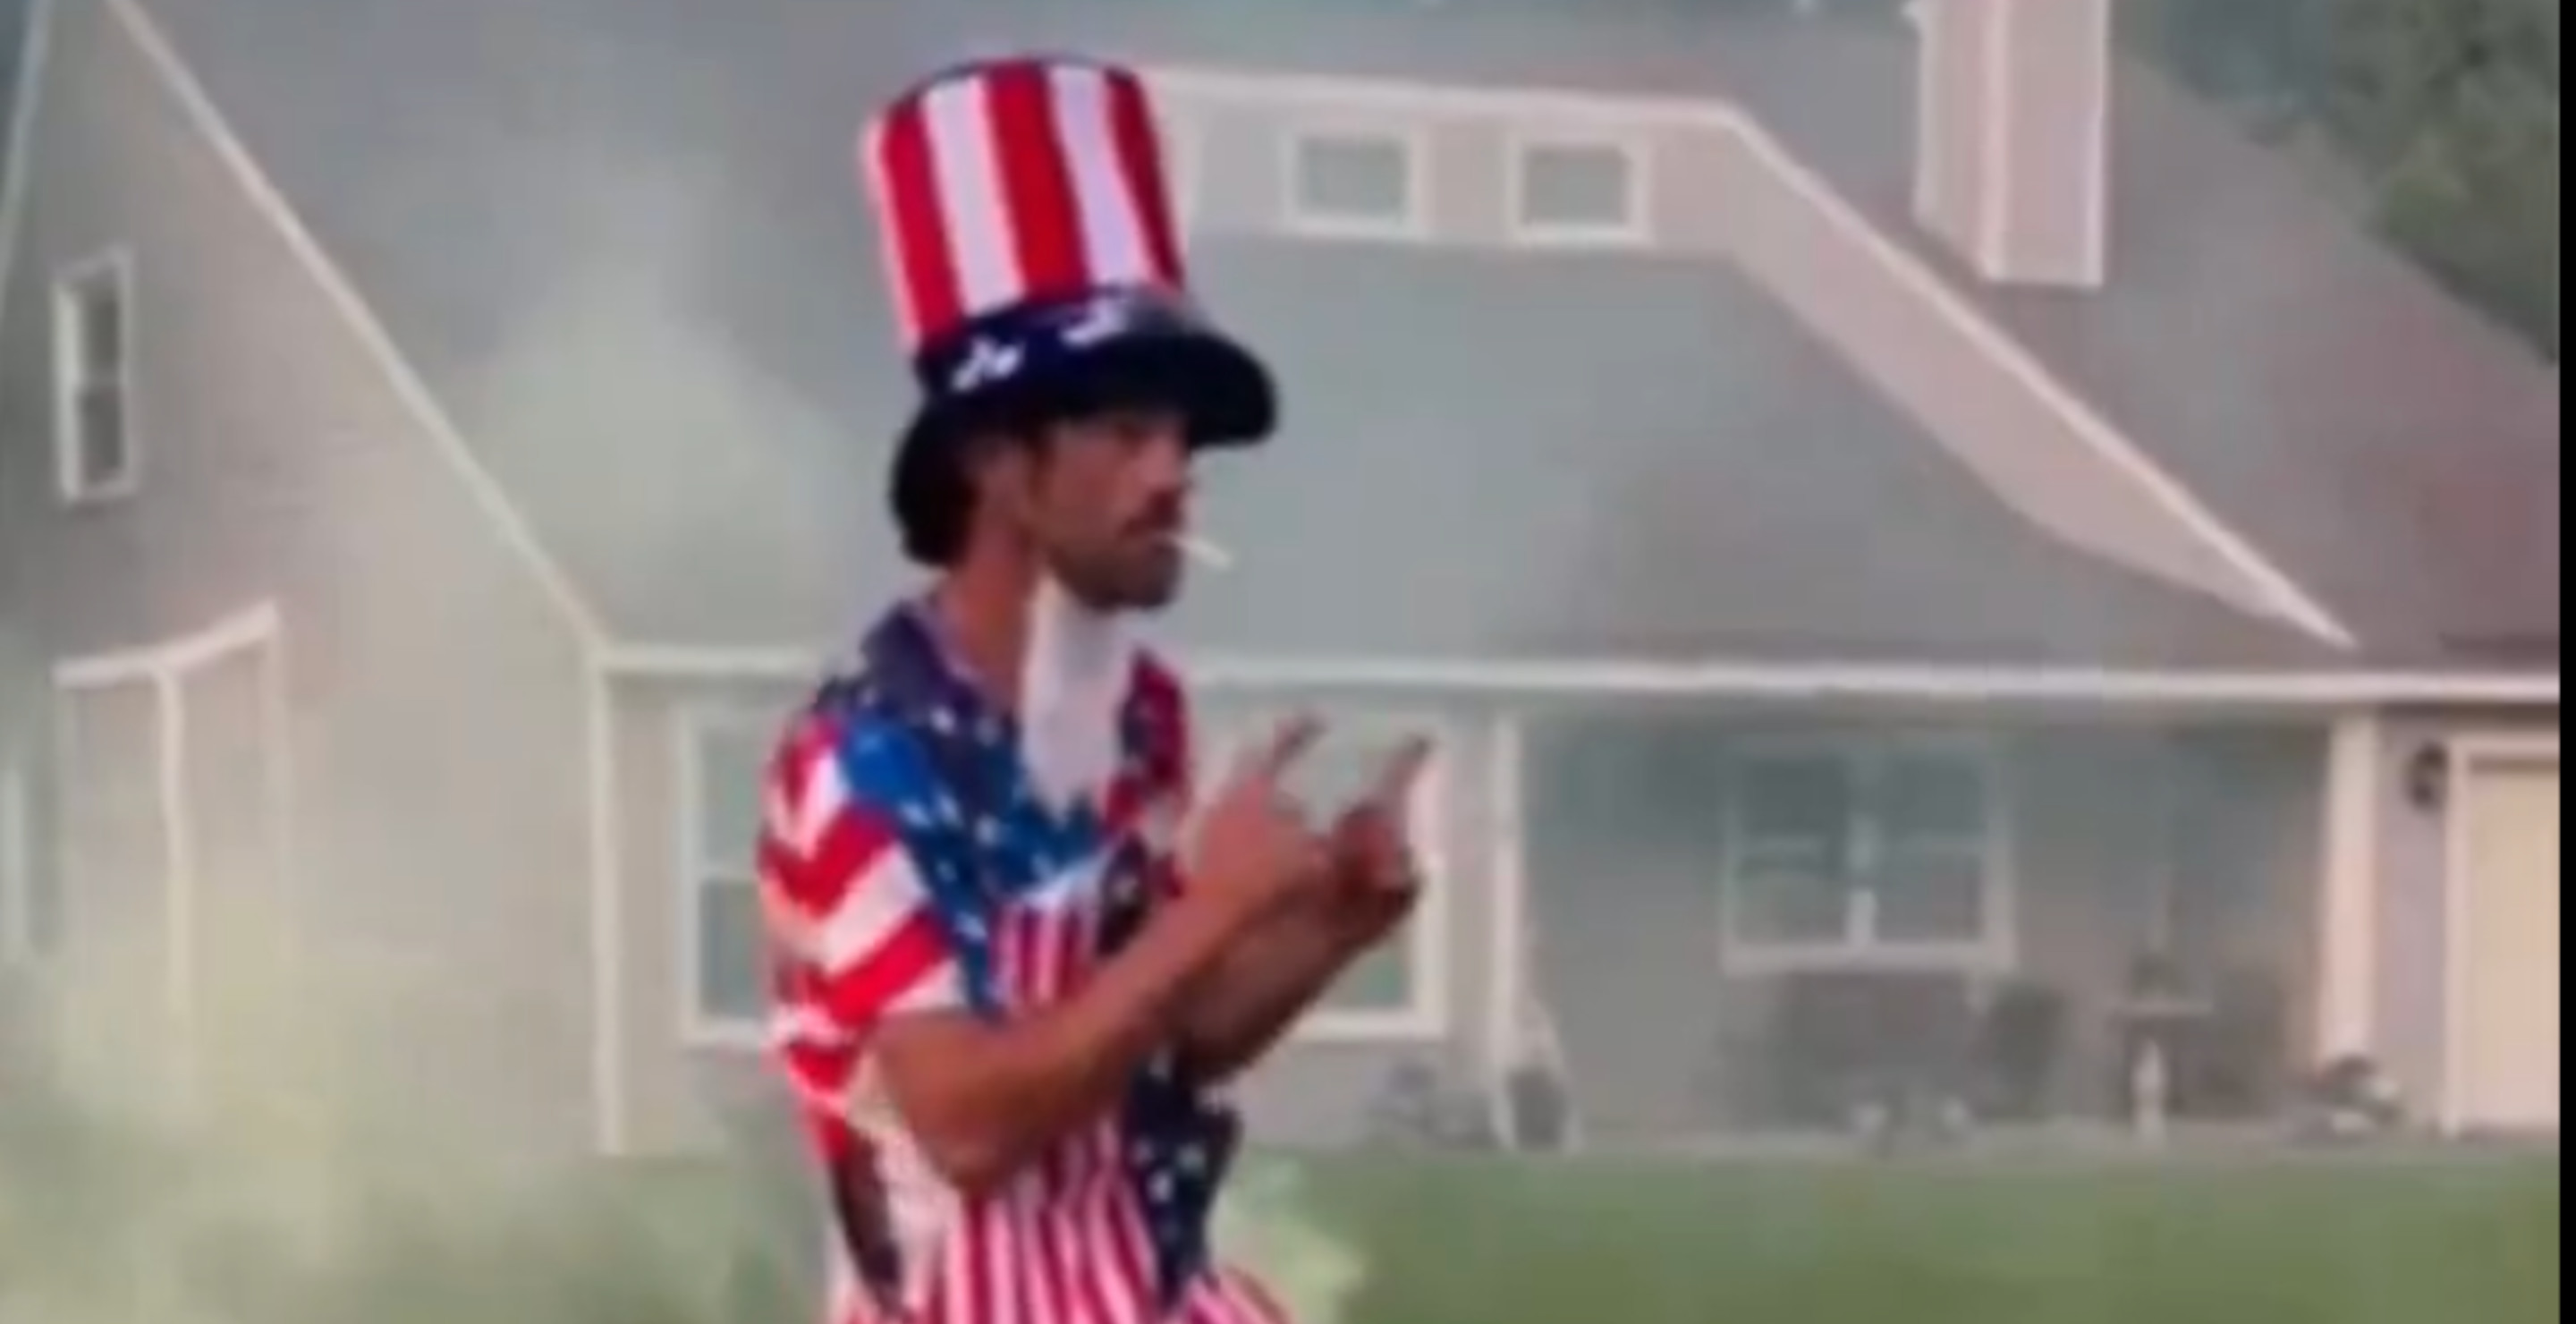 Video Shows South Carolina Father Dancing Moments Before He Placed Exploding Firework That Killed Him